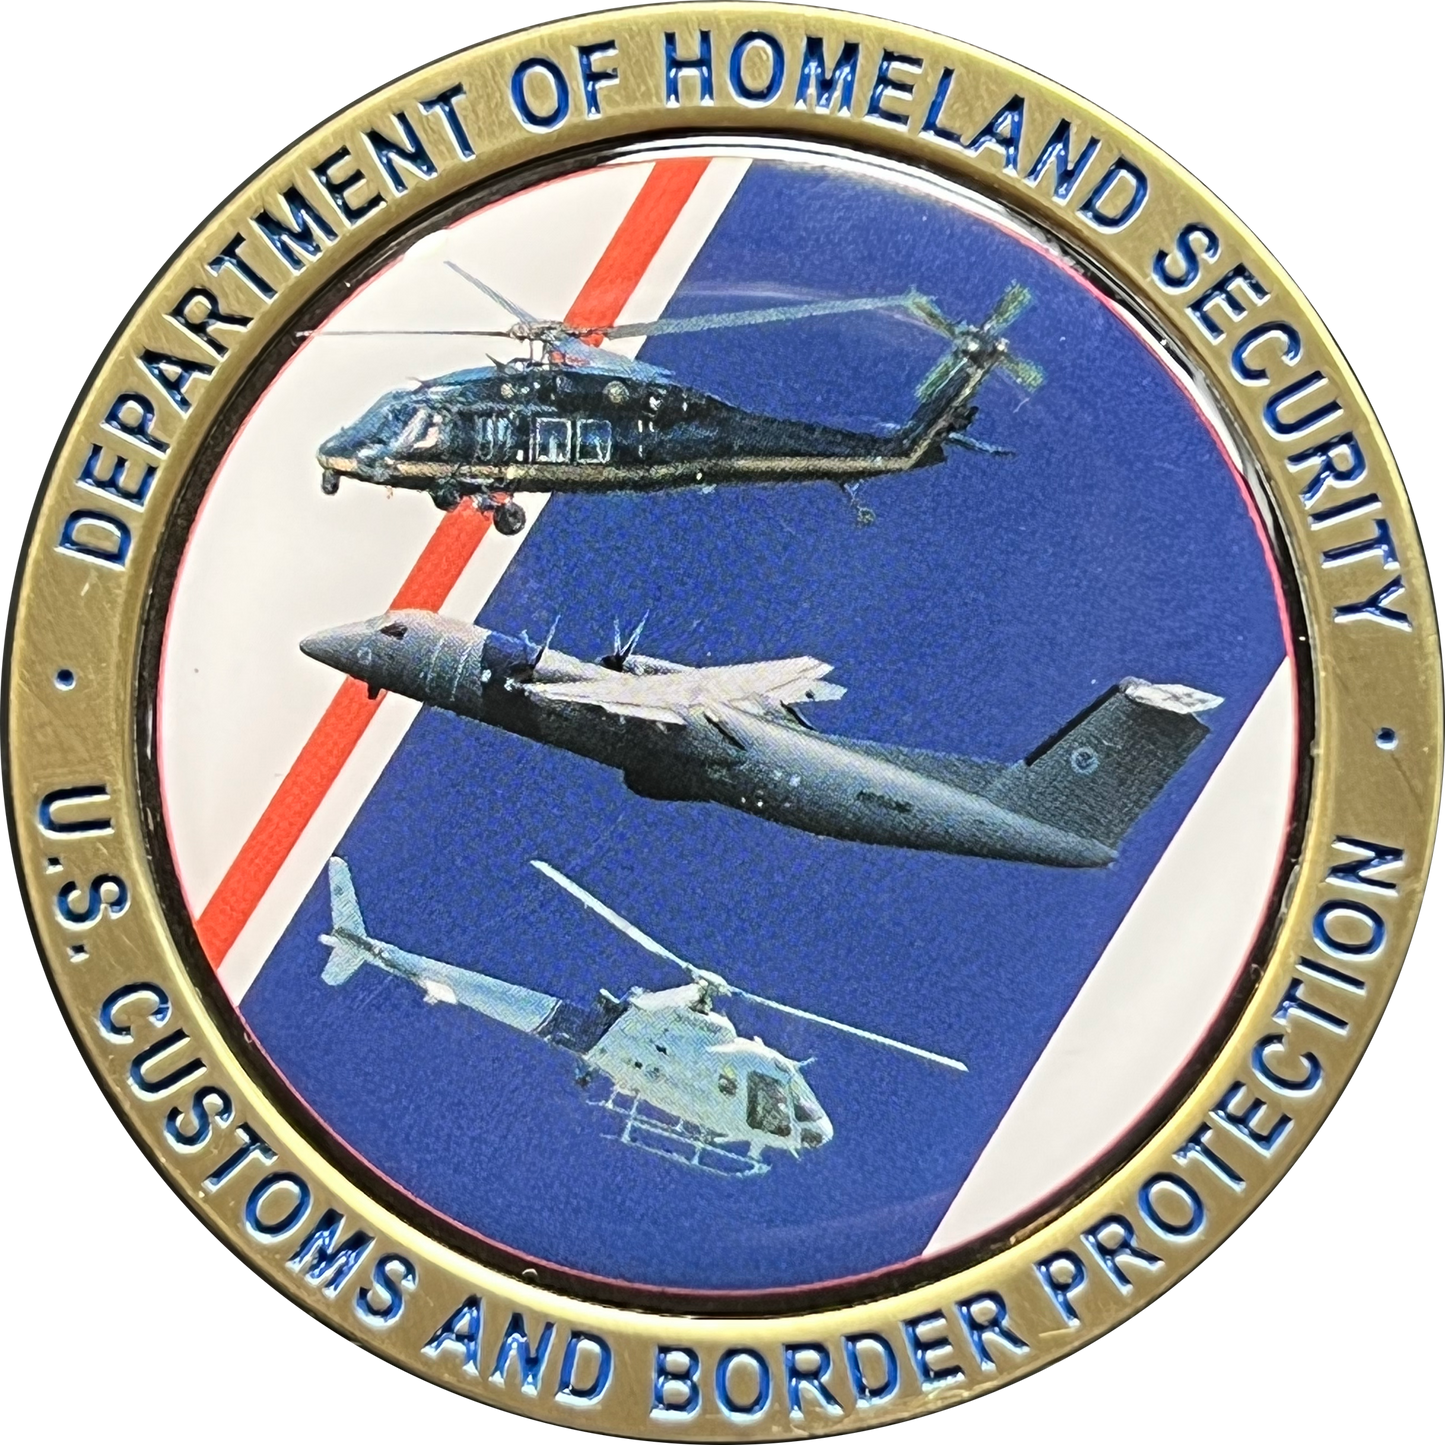 GL2-011 CBP Air and Marine Operations AMO Air Interdiction Agent AIA Homeland Wings Challenge Coin